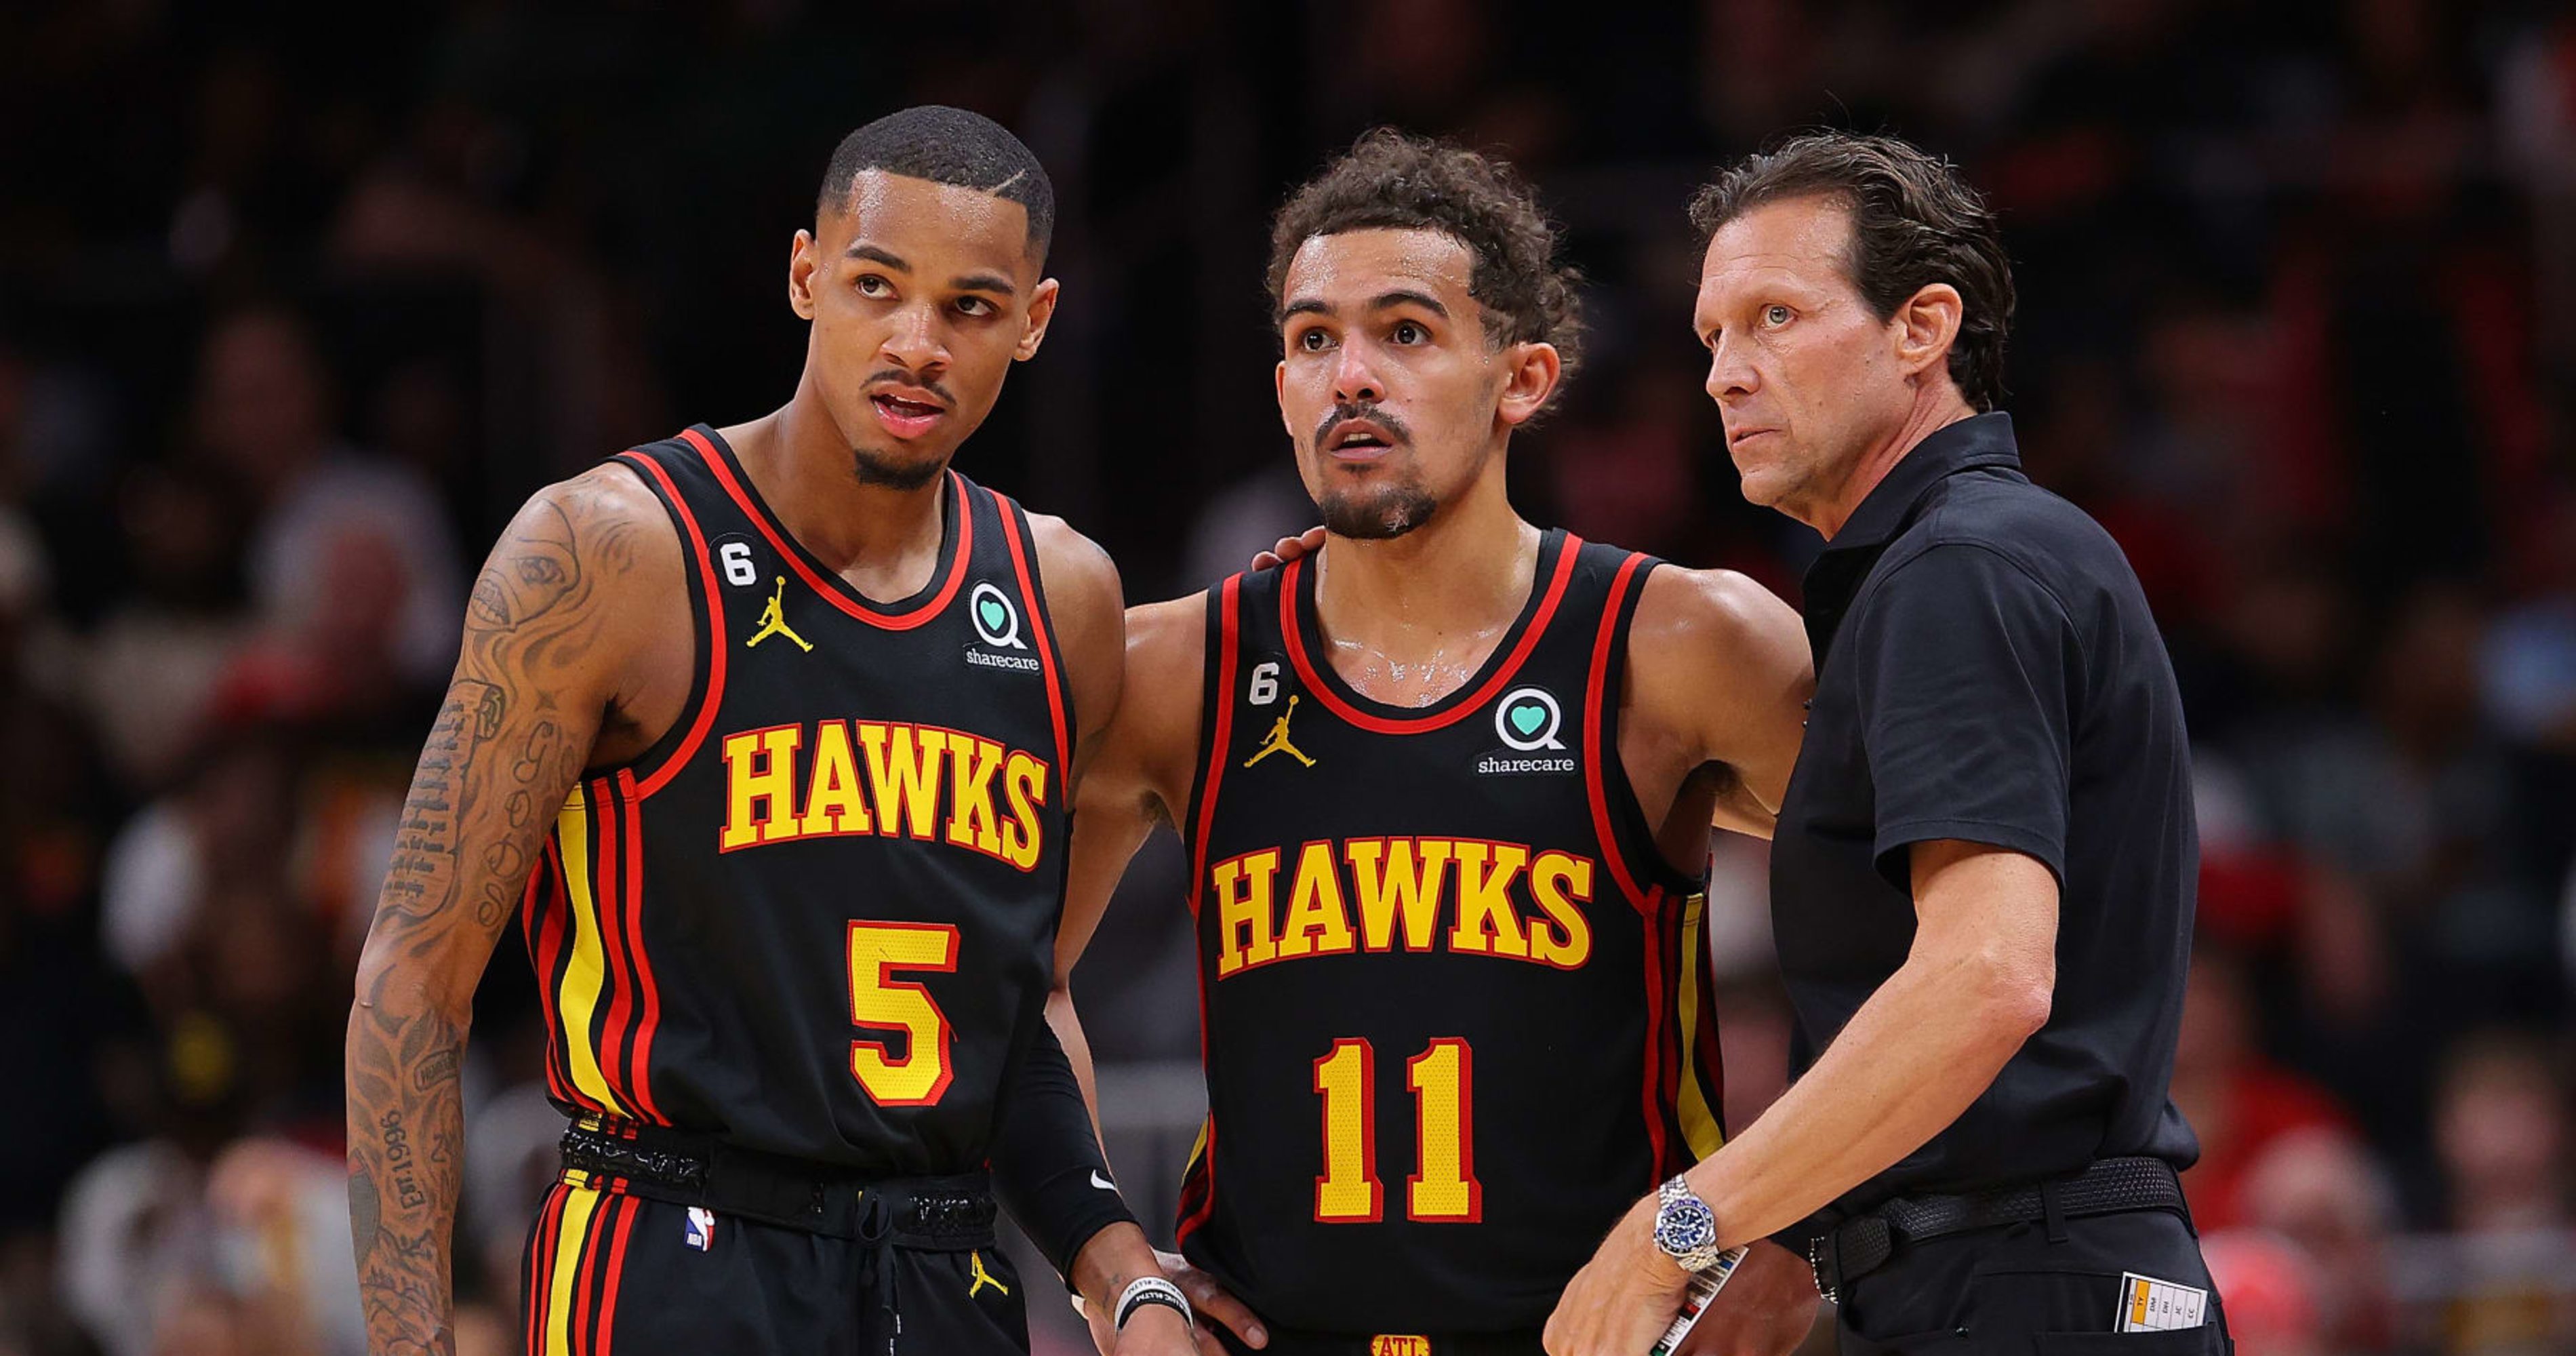 Hawks 202324 Schedule Top Games, Championship Odds and Record